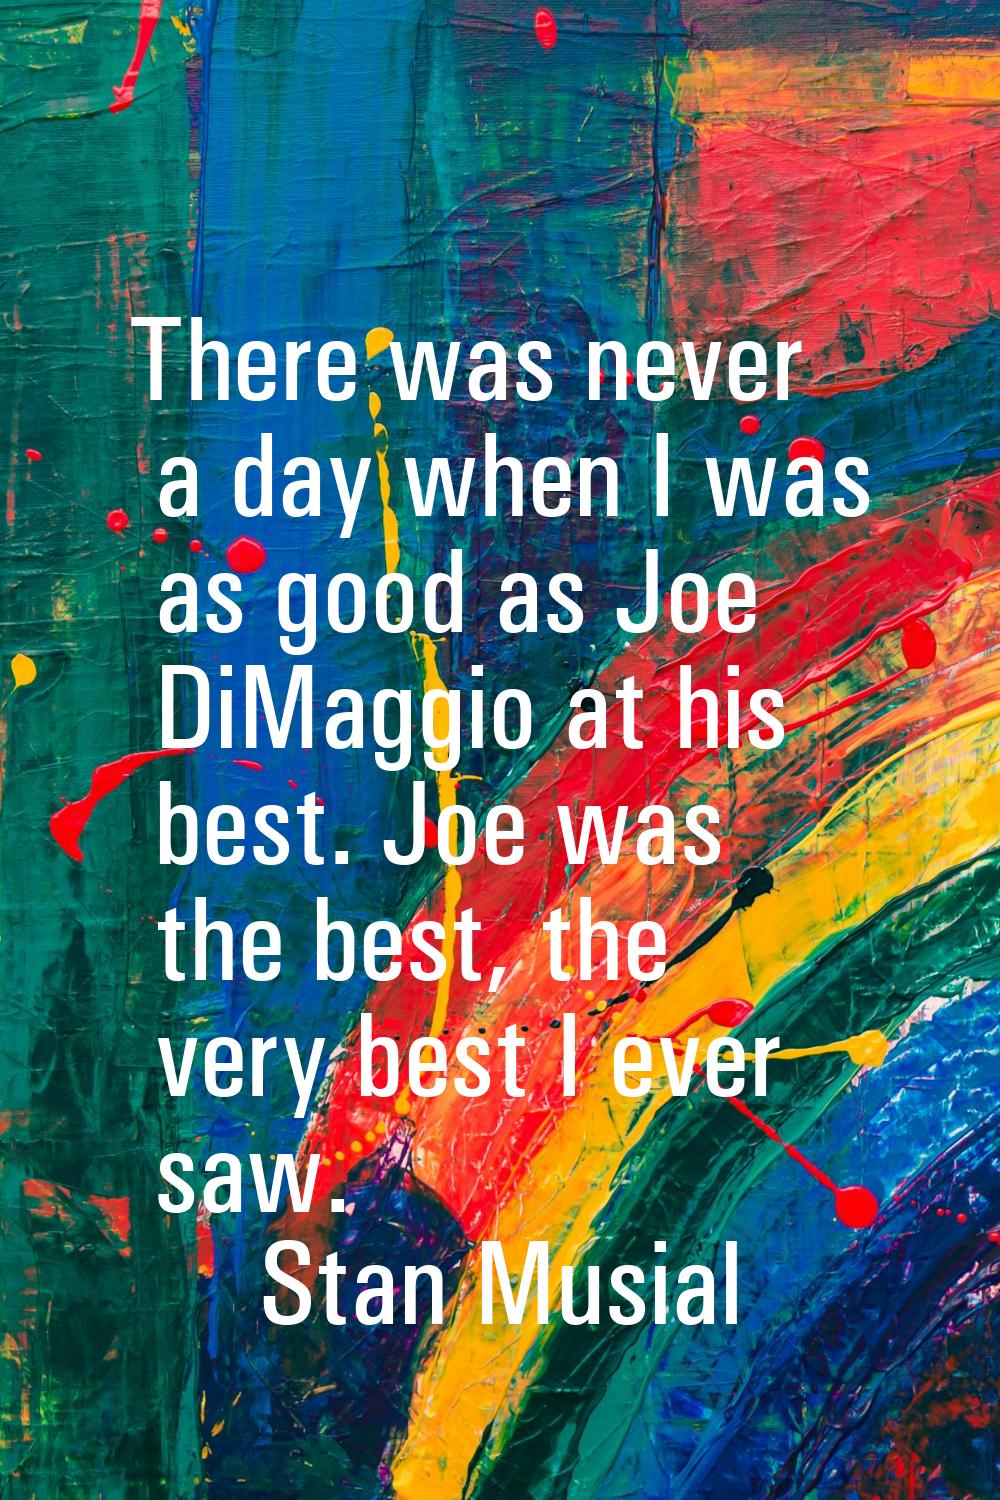 There was never a day when I was as good as Joe DiMaggio at his best. Joe was the best, the very be